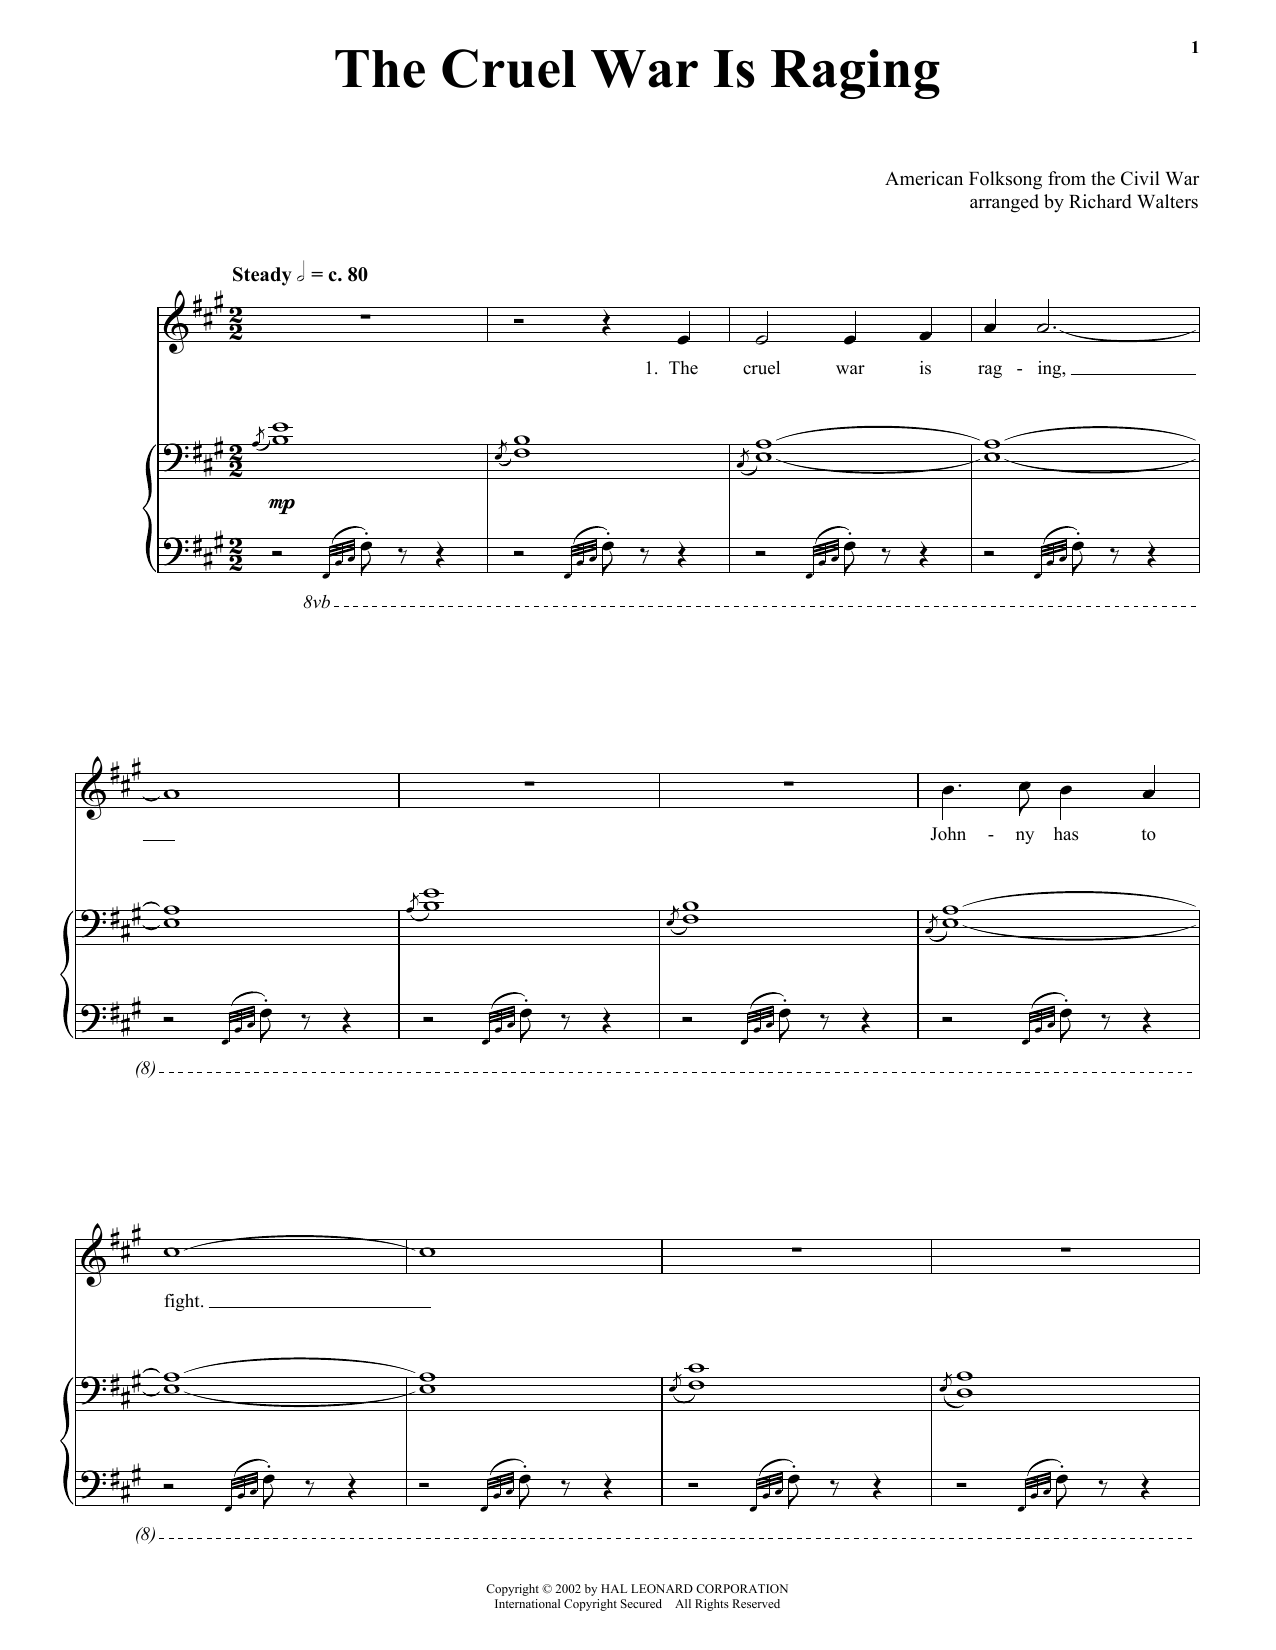 American Folk Song The Cruel War Is Raging sheet music notes and chords. Download Printable PDF.